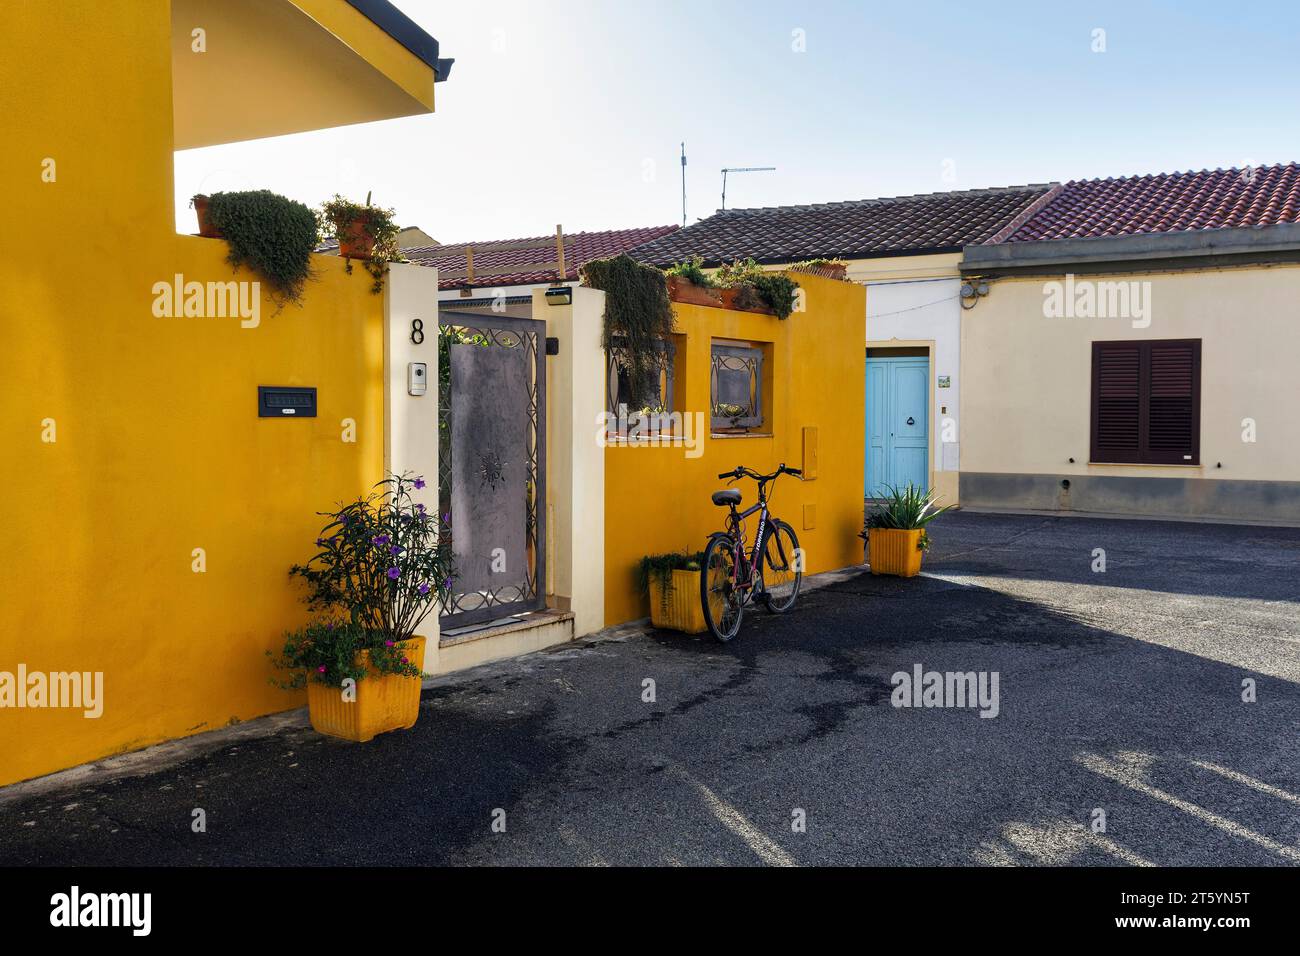 Potted plants and bicycle in front of a yellow house facade, Cabras, Oristano, Western Sardinia, Sardinia, Italy Stock Photo